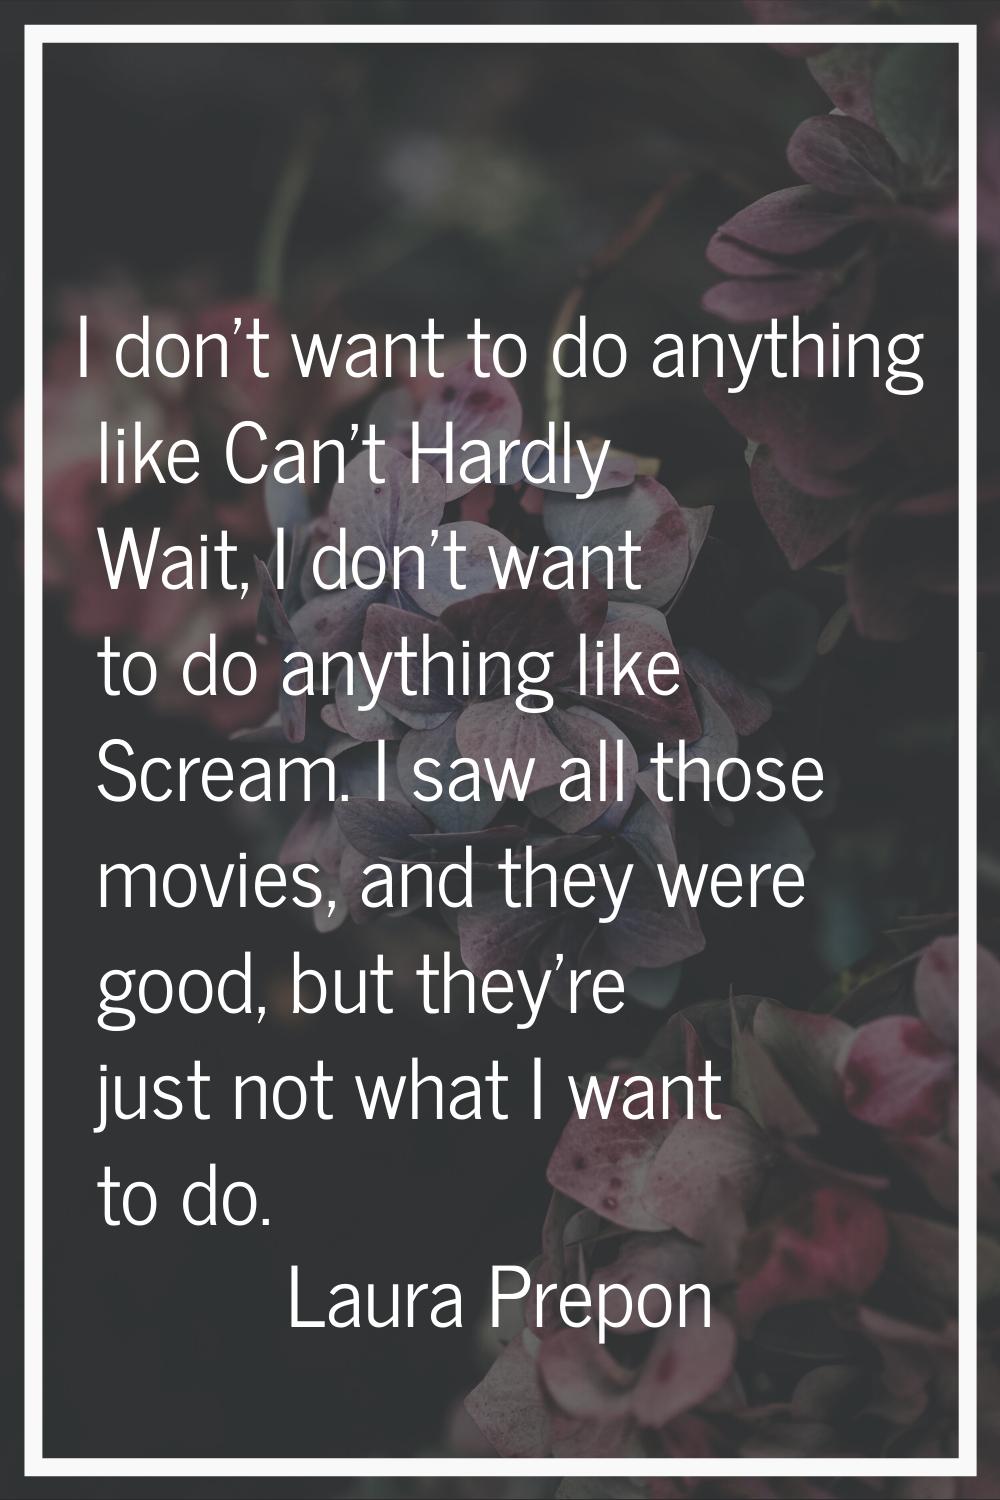 I don't want to do anything like Can't Hardly Wait, I don't want to do anything like Scream. I saw 